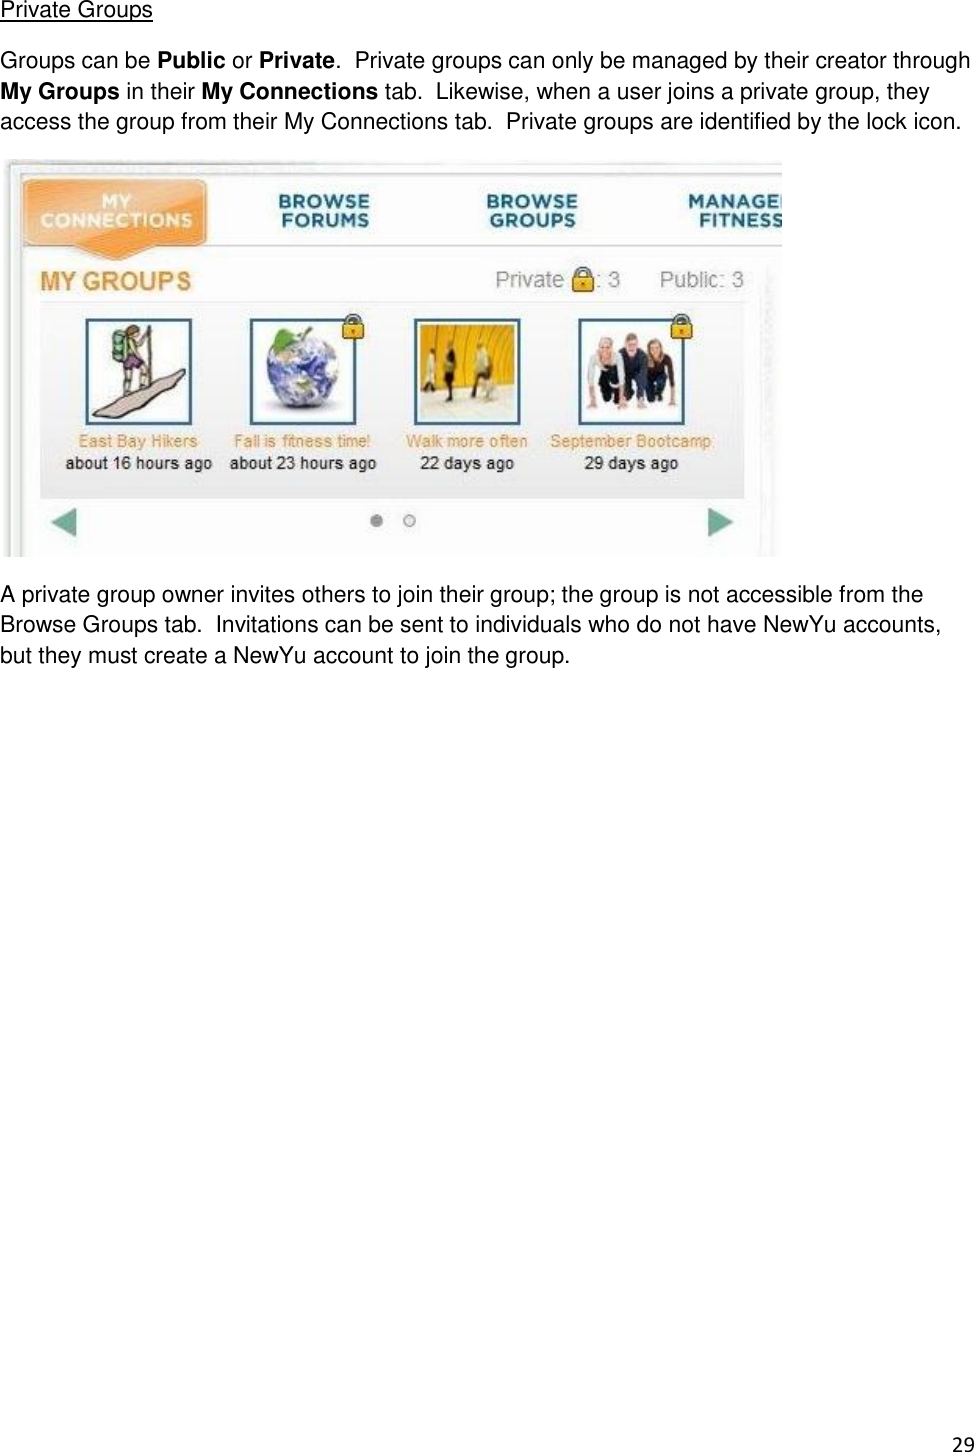 29 Private Groups Groups can be Public or Private.  Private groups can only be managed by their creator through My Groups in their My Connections tab.  Likewise, when a user joins a private group, they access the group from their My Connections tab.  Private groups are identified by the lock icon.  A private group owner invites others to join their group; the group is not accessible from the Browse Groups tab.  Invitations can be sent to individuals who do not have NewYu accounts, but they must create a NewYu account to join the group.              